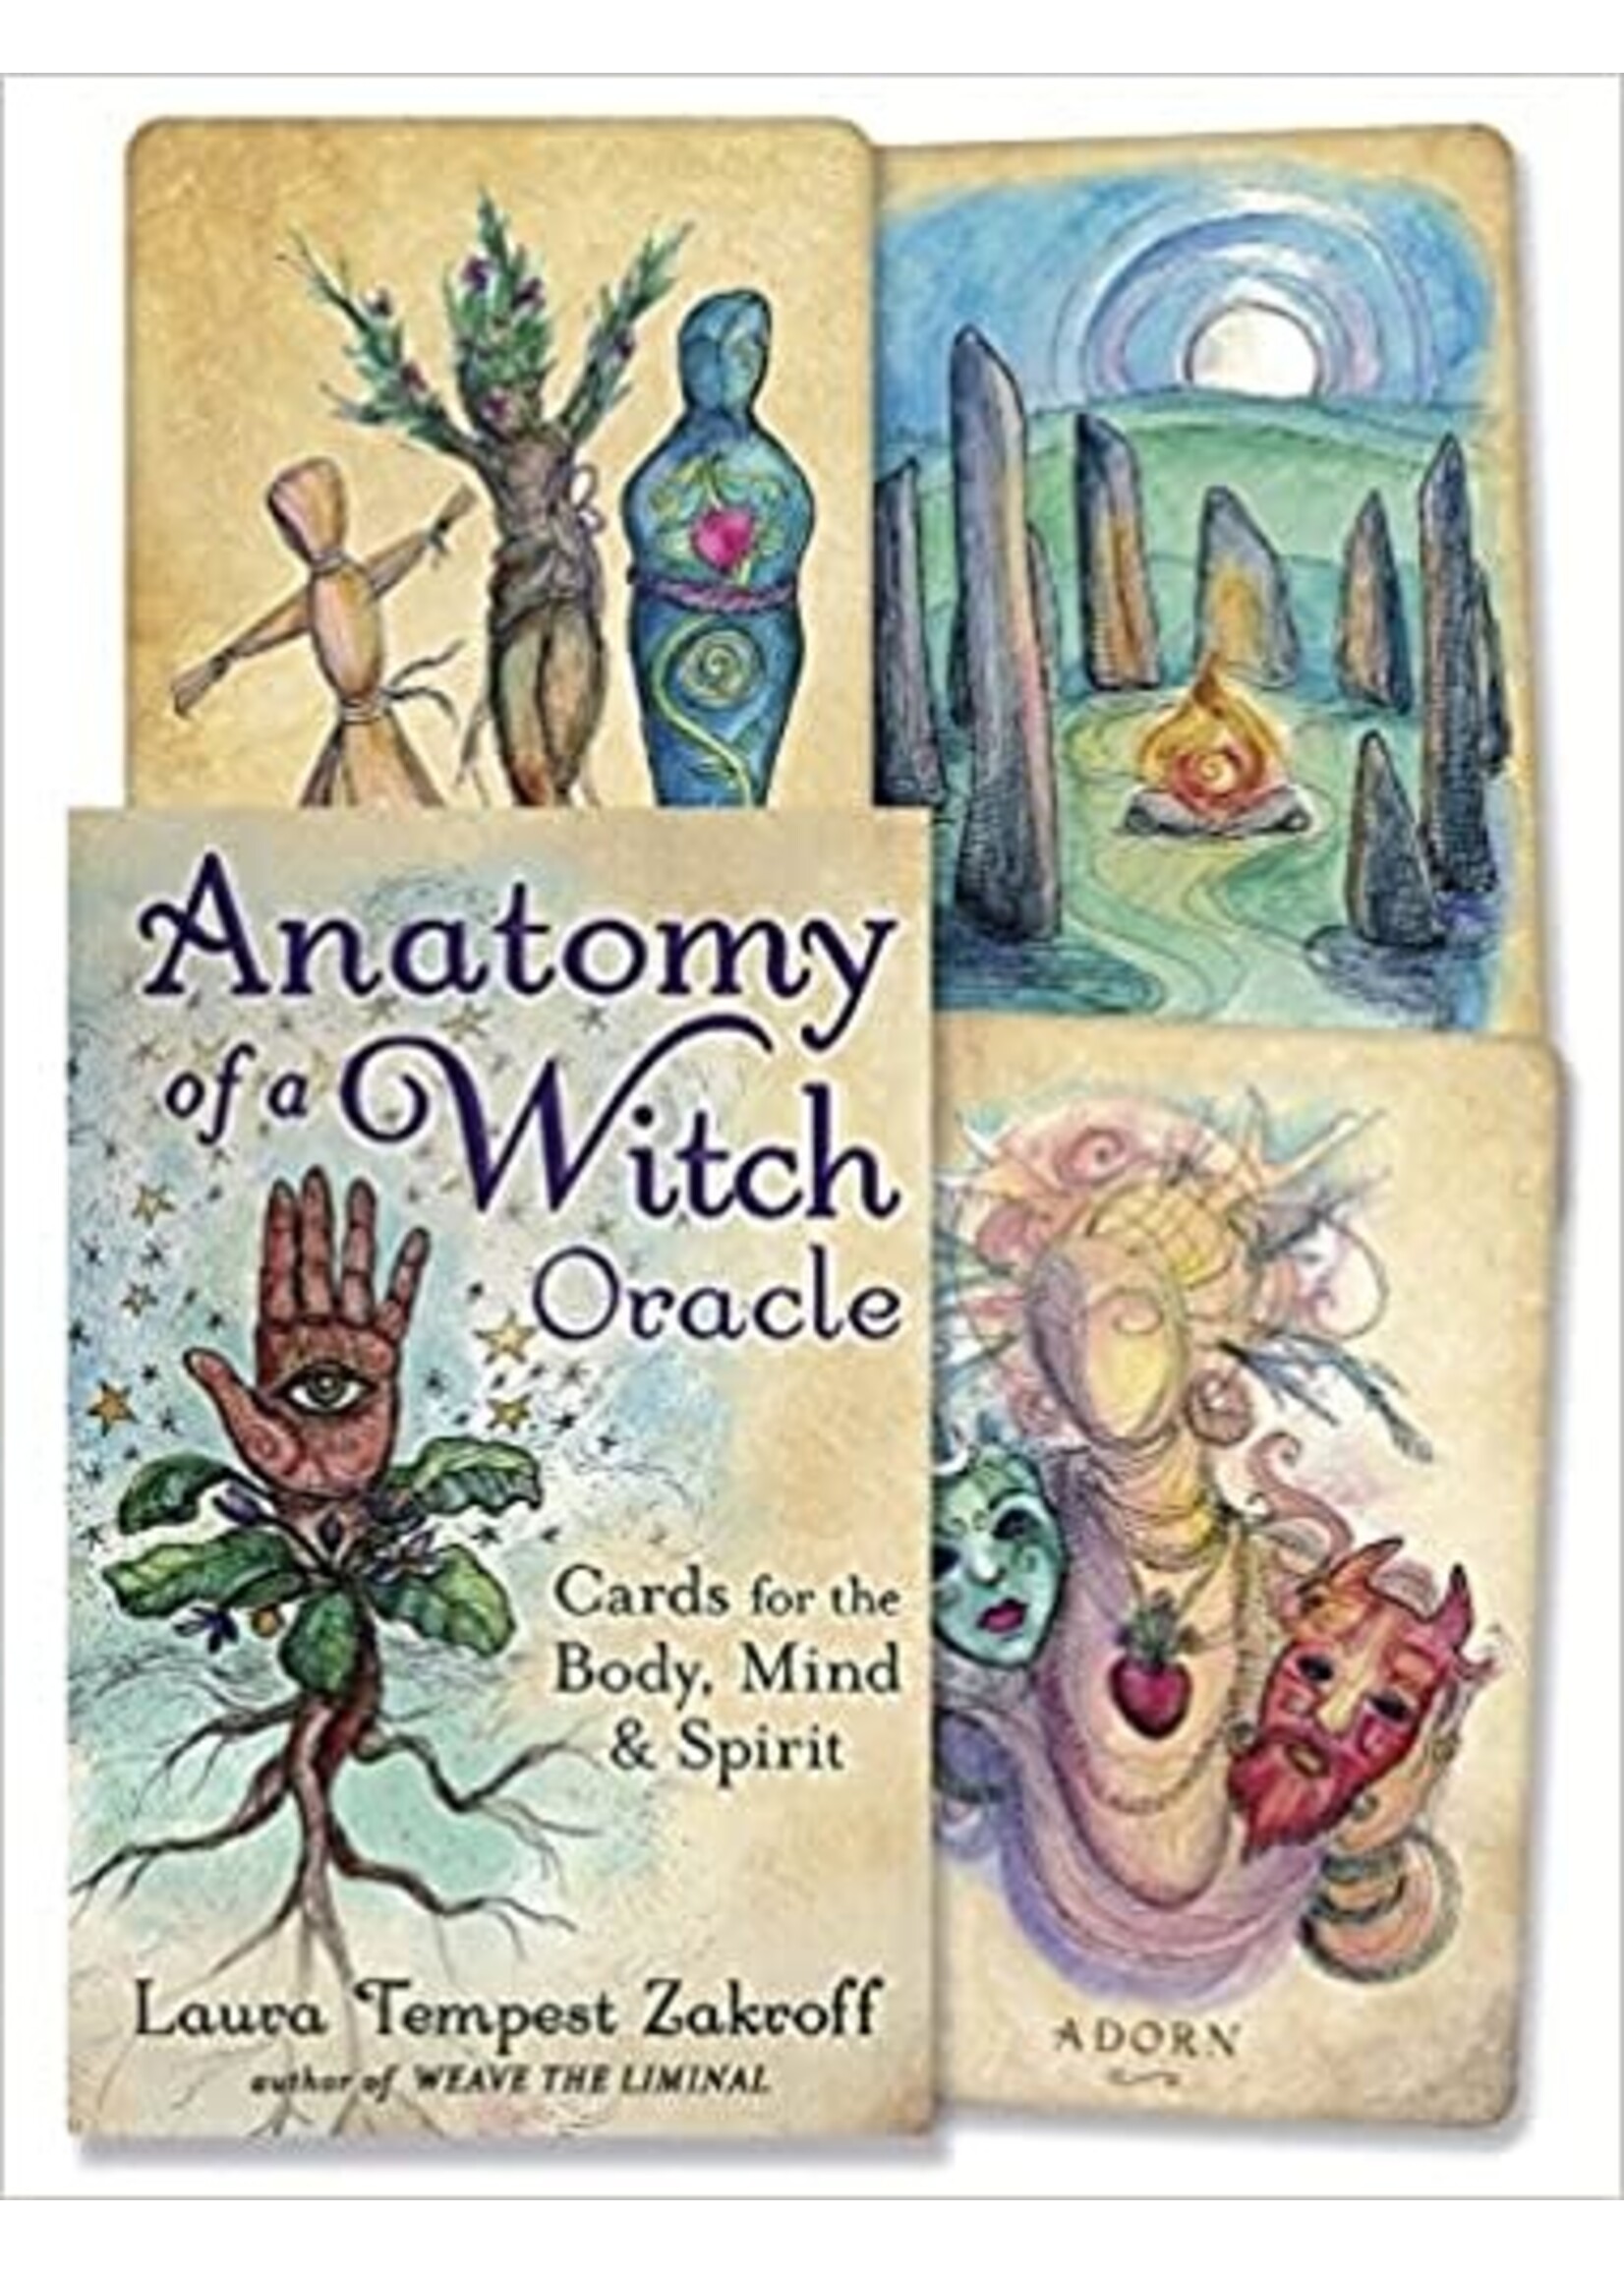 Anatomy of a Witch Oracle by Laura Tempest Zakroff